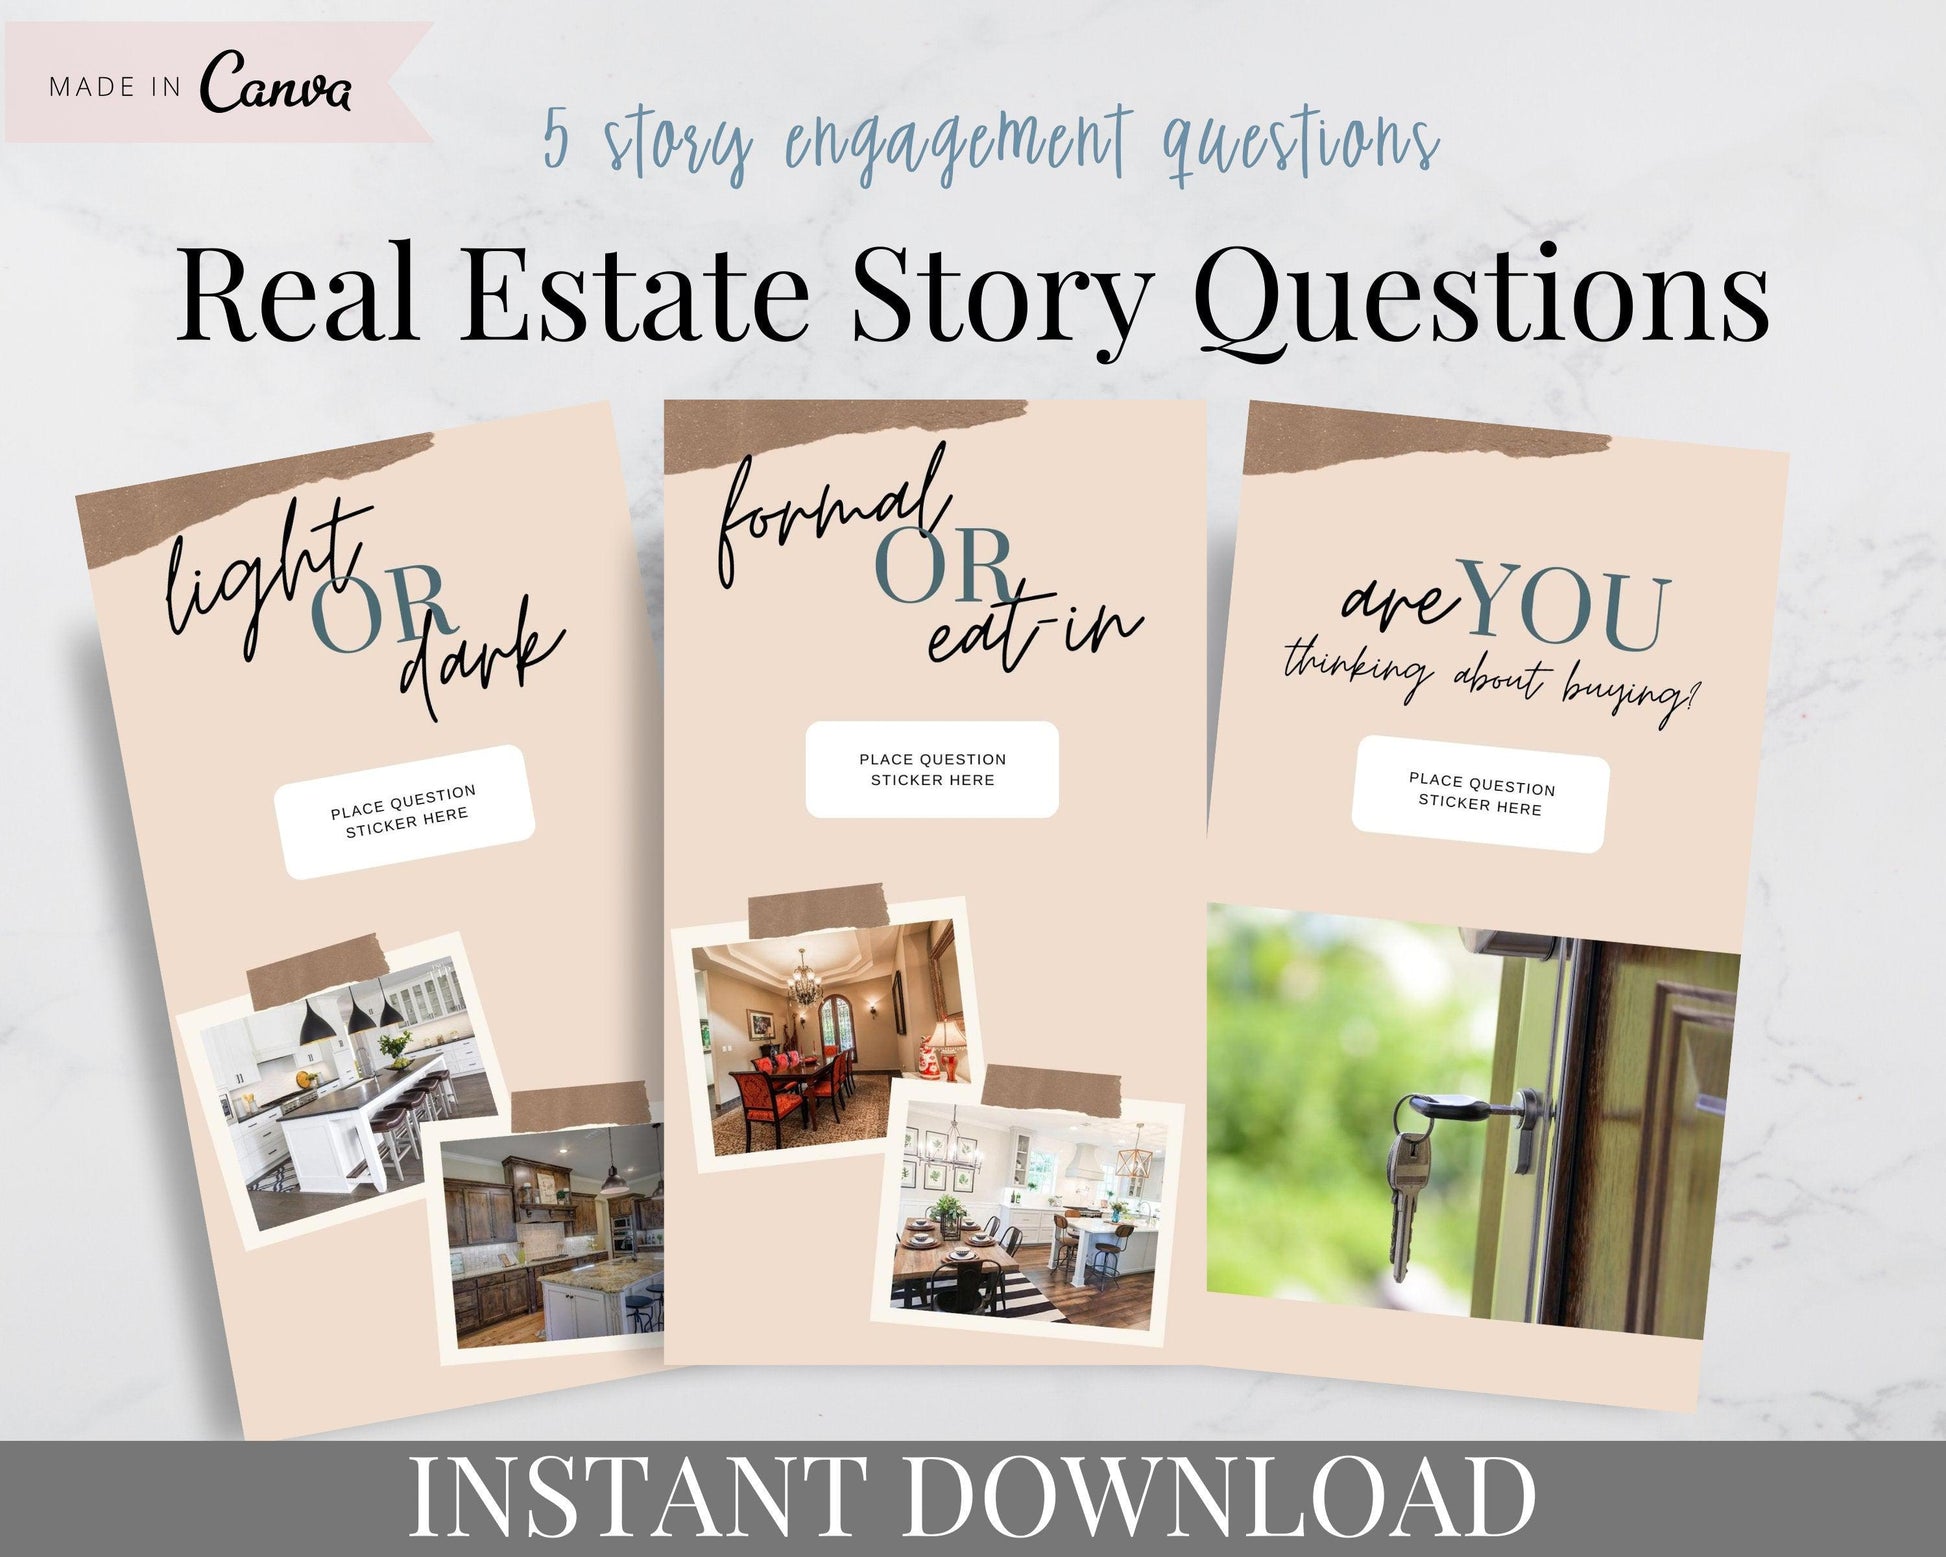 Real Estate Instagram Story - Engagement Questions